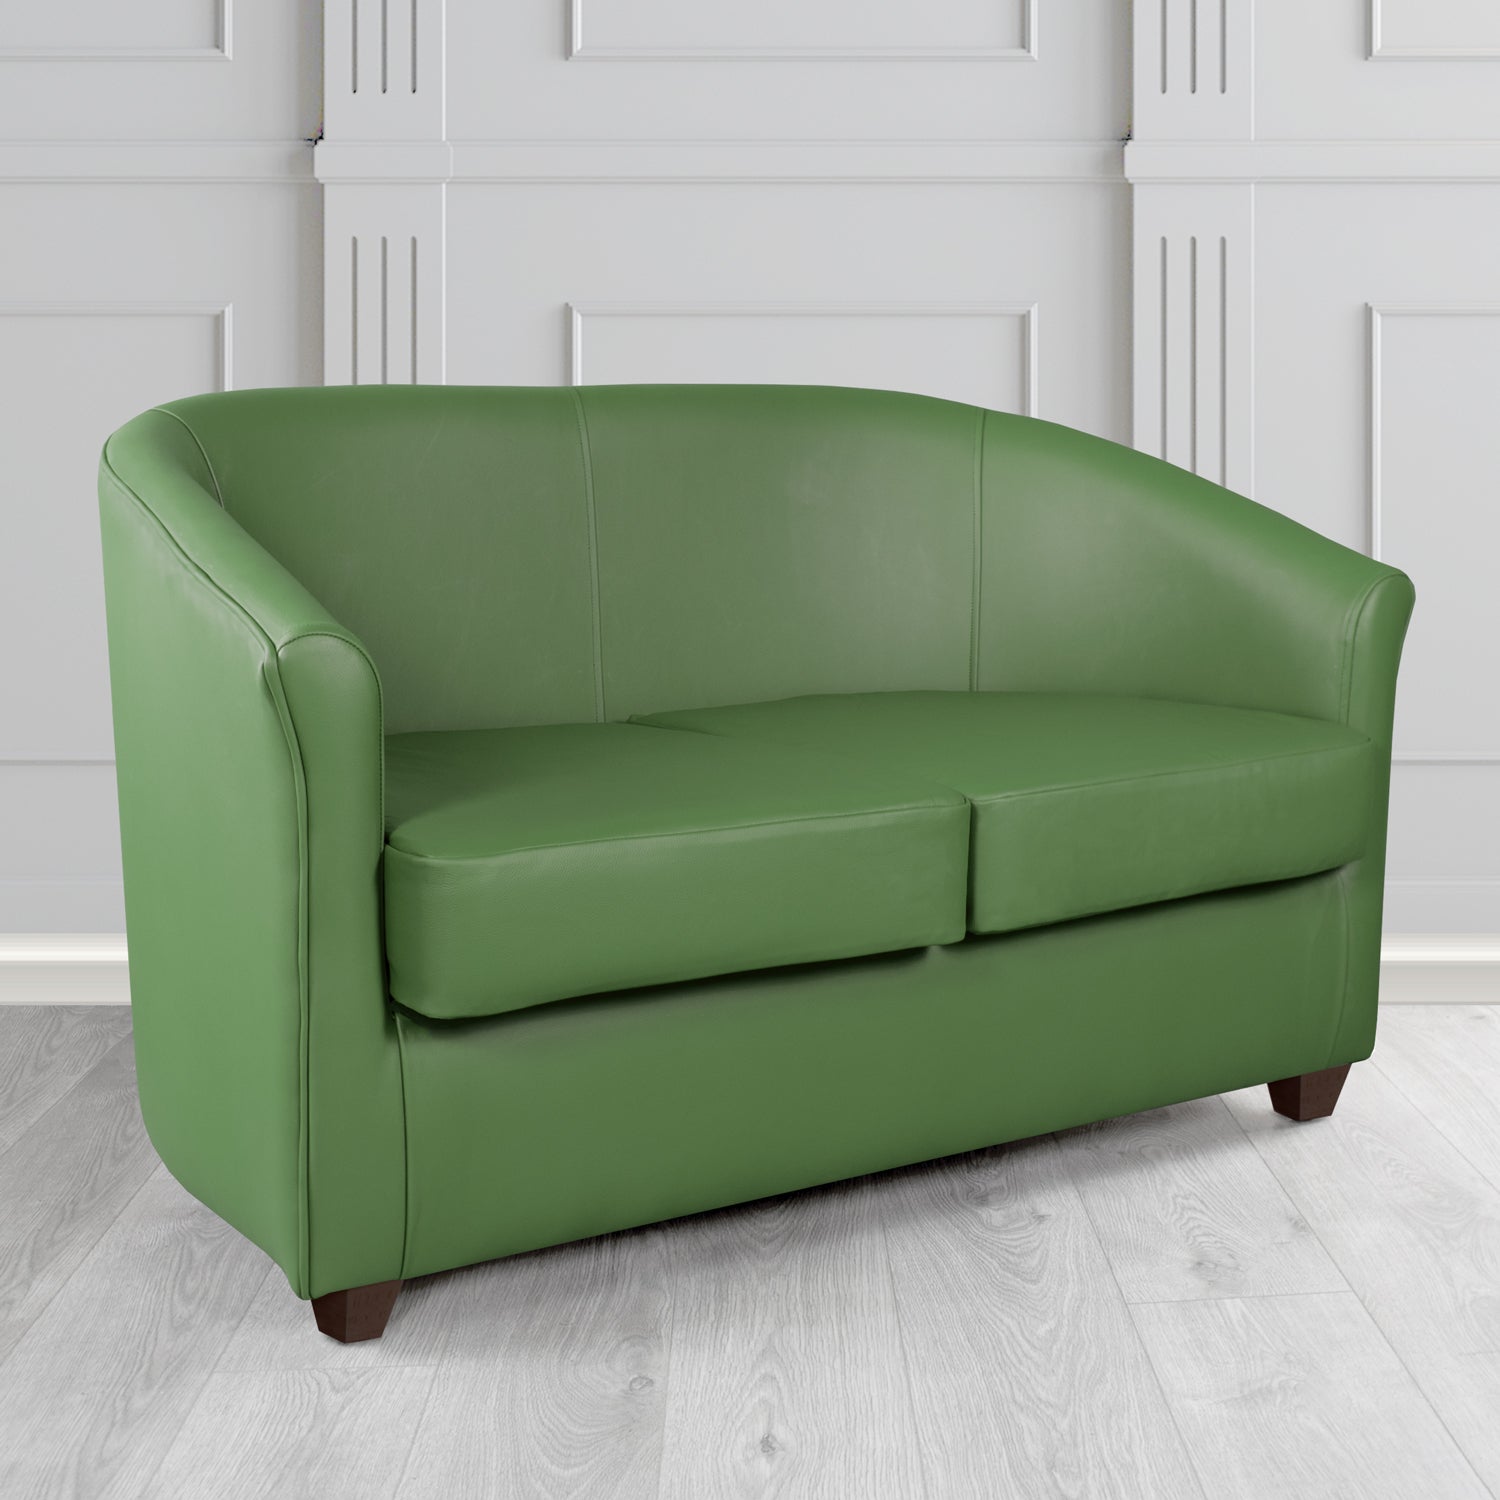 Cannes 2 Seater Tub Sofa in Just Colour Moss Crib 5 Faux Leather - The Tub Chair Shop